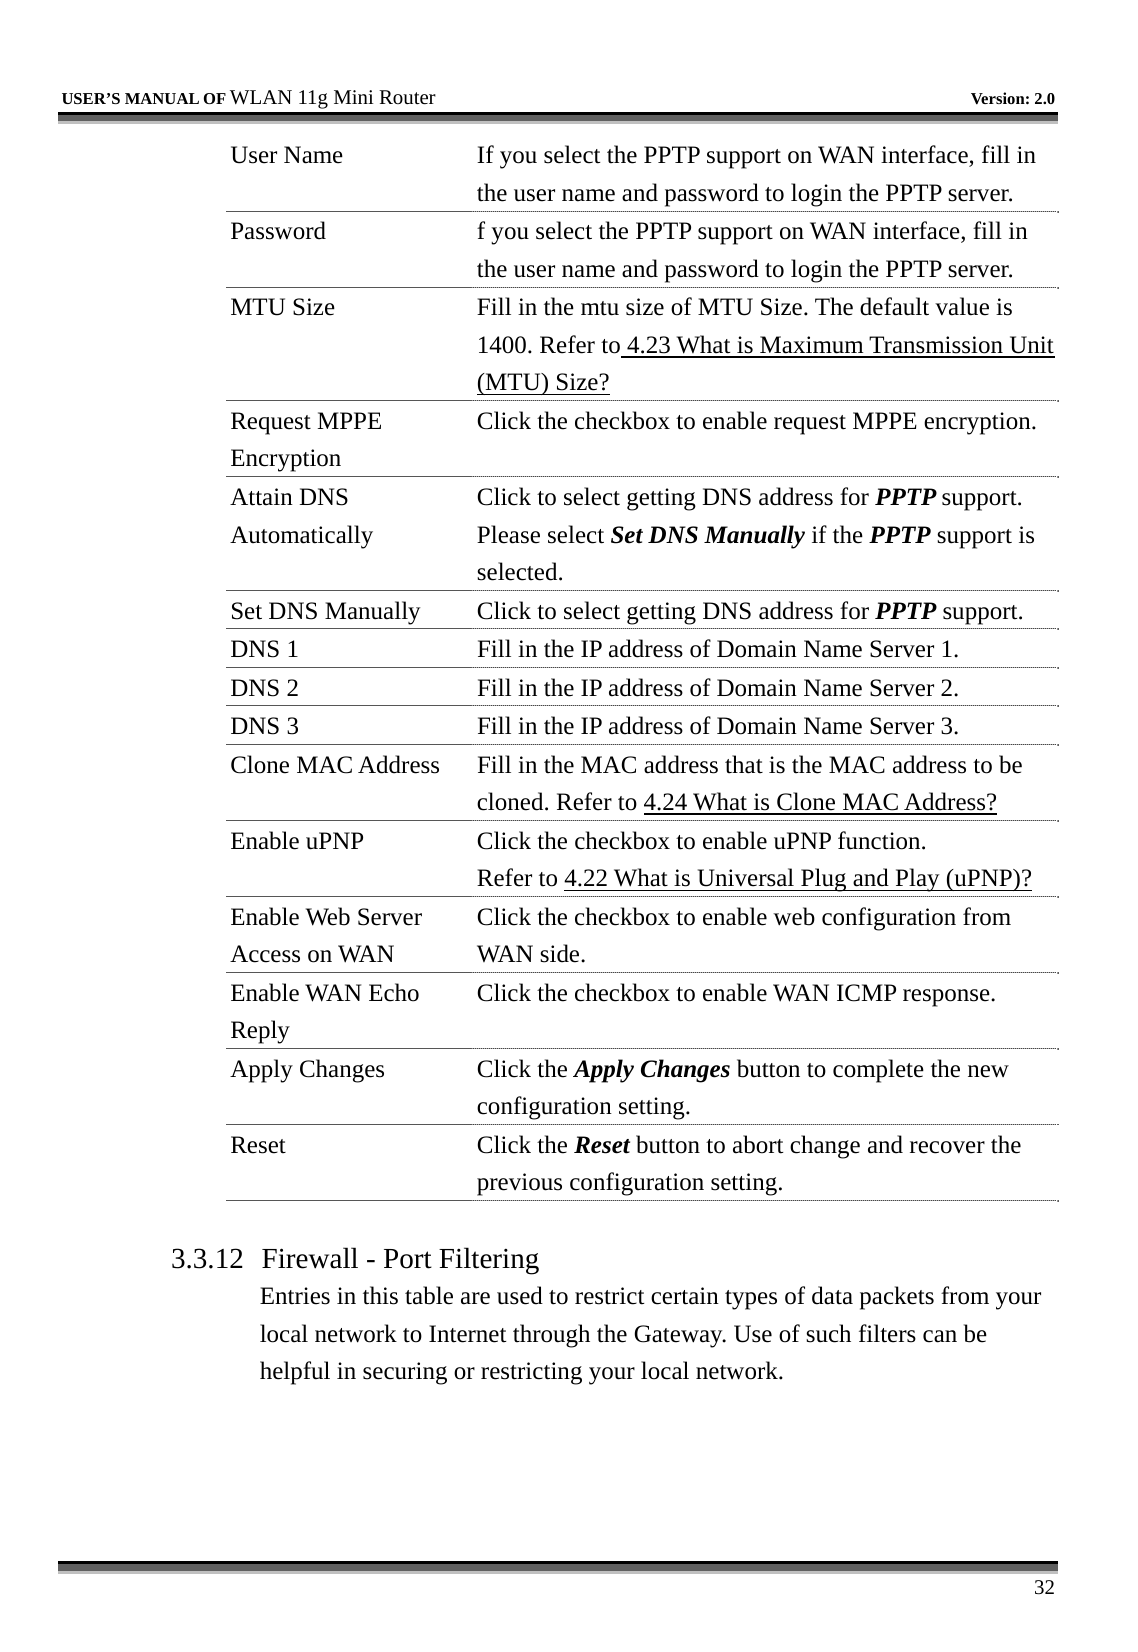   USER’S MANUAL OF WLAN 11g Mini Router   Version: 2.0     32 User Name  If you select the PPTP support on WAN interface, fill in the user name and password to login the PPTP server. Password  f you select the PPTP support on WAN interface, fill in the user name and password to login the PPTP server. MTU Size  Fill in the mtu size of MTU Size. The default value is 1400. Refer to 4.23 What is Maximum Transmission Unit (MTU) Size? Request MPPE Encryption Click the checkbox to enable request MPPE encryption. Attain DNS Automatically Click to select getting DNS address for PPTP support. Please select Set DNS Manually if the PPTP support is selected. Set DNS Manually  Click to select getting DNS address for PPTP support. DNS 1  Fill in the IP address of Domain Name Server 1. DNS 2  Fill in the IP address of Domain Name Server 2. DNS 3  Fill in the IP address of Domain Name Server 3. Clone MAC Address  Fill in the MAC address that is the MAC address to be cloned. Refer to 4.24 What is Clone MAC Address? Enable uPNP  Click the checkbox to enable uPNP function. Refer to 4.22 What is Universal Plug and Play (uPNP)? Enable Web Server Access on WAN Click the checkbox to enable web configuration from WAN side. Enable WAN Echo Reply Click the checkbox to enable WAN ICMP response. Apply Changes  Click the Apply Changes button to complete the new configuration setting. Reset Click the Reset button to abort change and recover the previous configuration setting.  3.3.12  Firewall - Port Filtering Entries in this table are used to restrict certain types of data packets from your local network to Internet through the Gateway. Use of such filters can be helpful in securing or restricting your local network.  